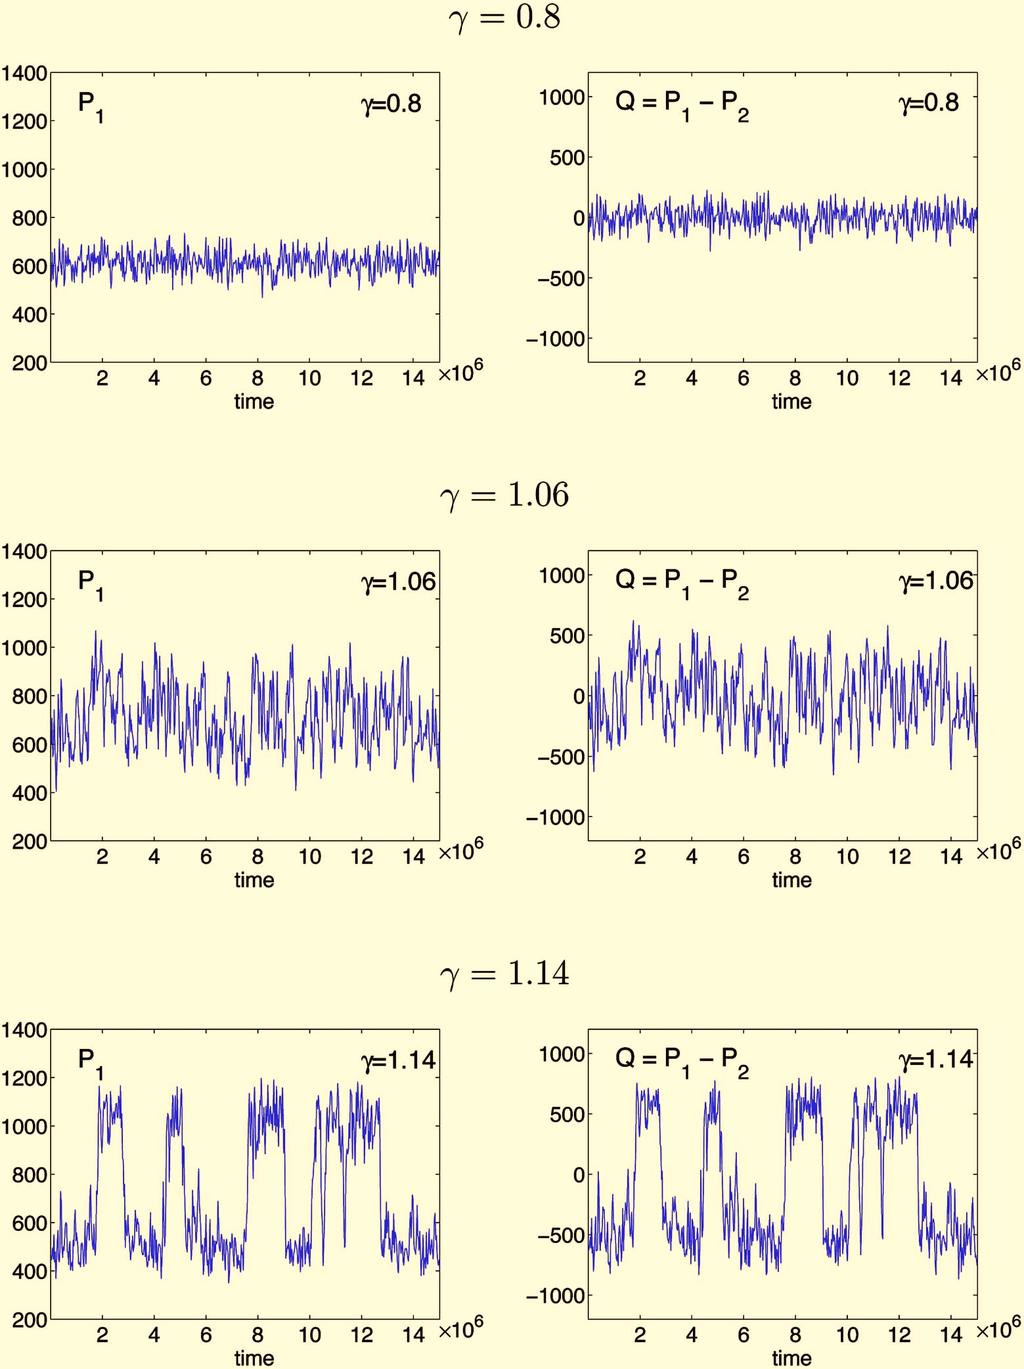 084106-7 Gene regulatory networks J. Chem. Phys. 124, 084106 2006 FIG. 5. Stochastic model I. Plots of P 1 and Q= P 1 P 2 as a function of time for different values of.